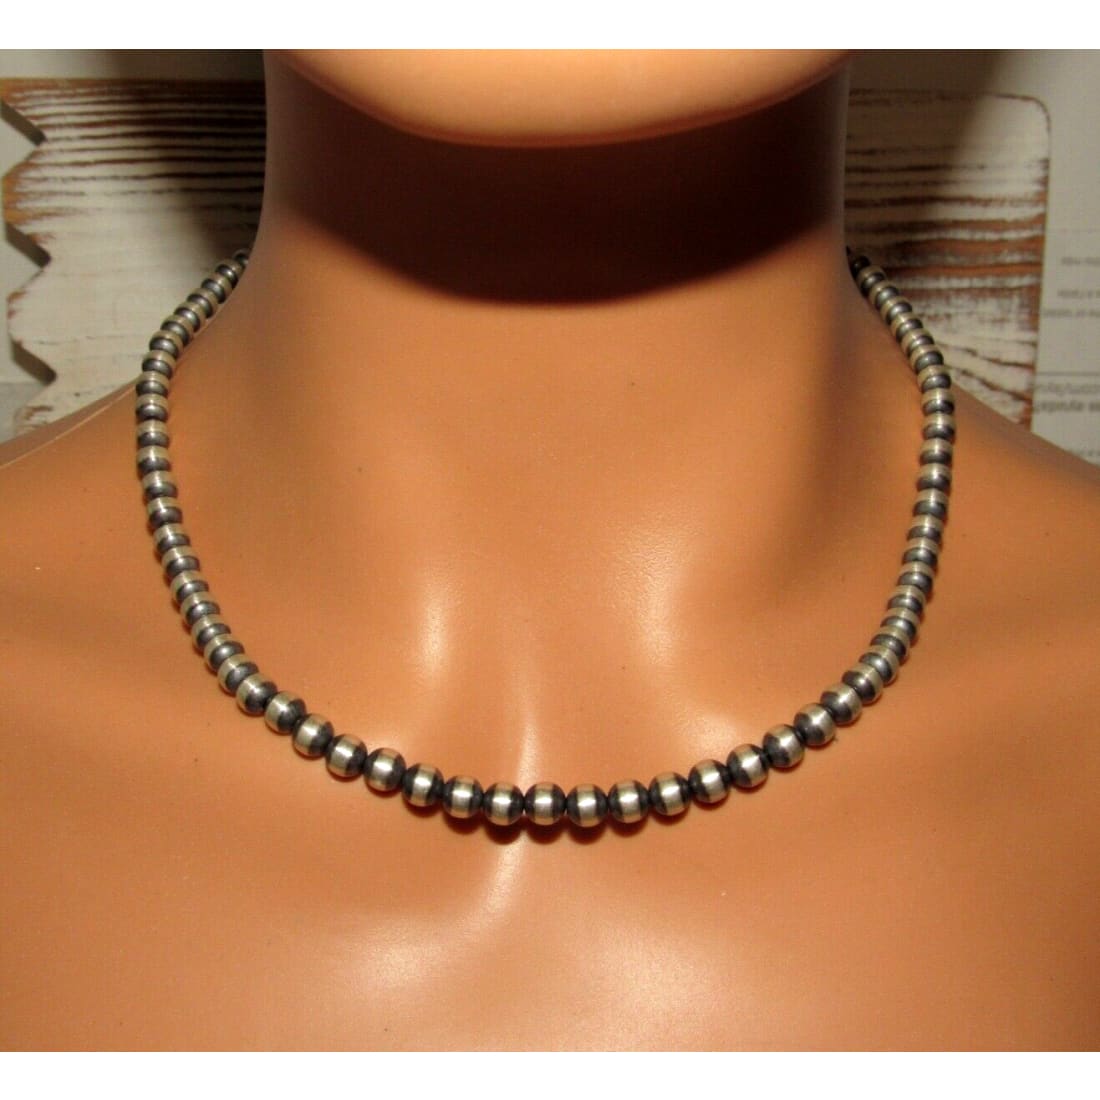 Navajo Pearls Necklace Sterling Silver 6mm Beads Necklace